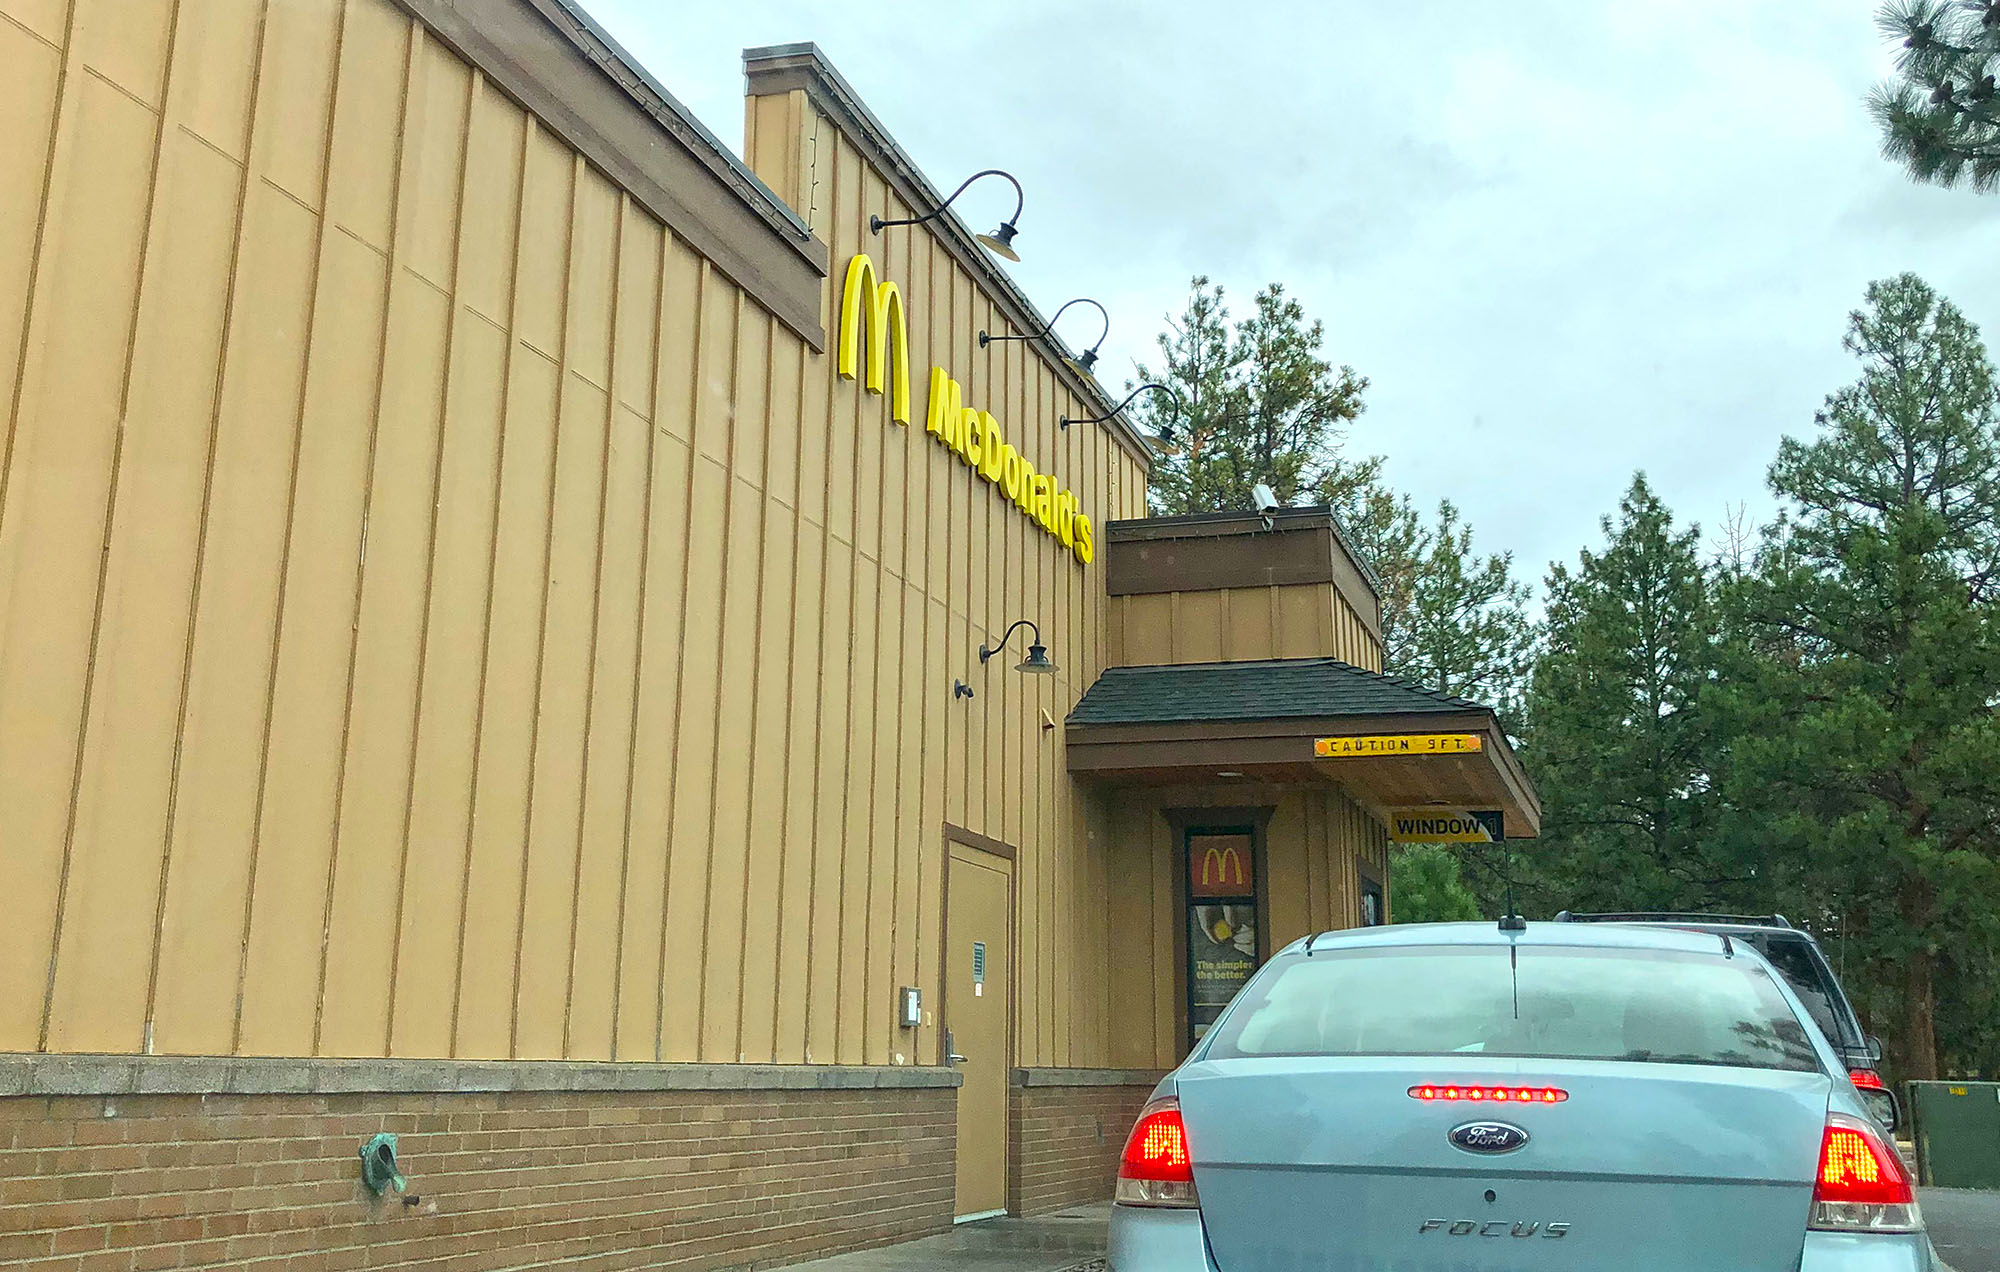 After a long day outside, drive-thru fast food restaurants are really appealing.